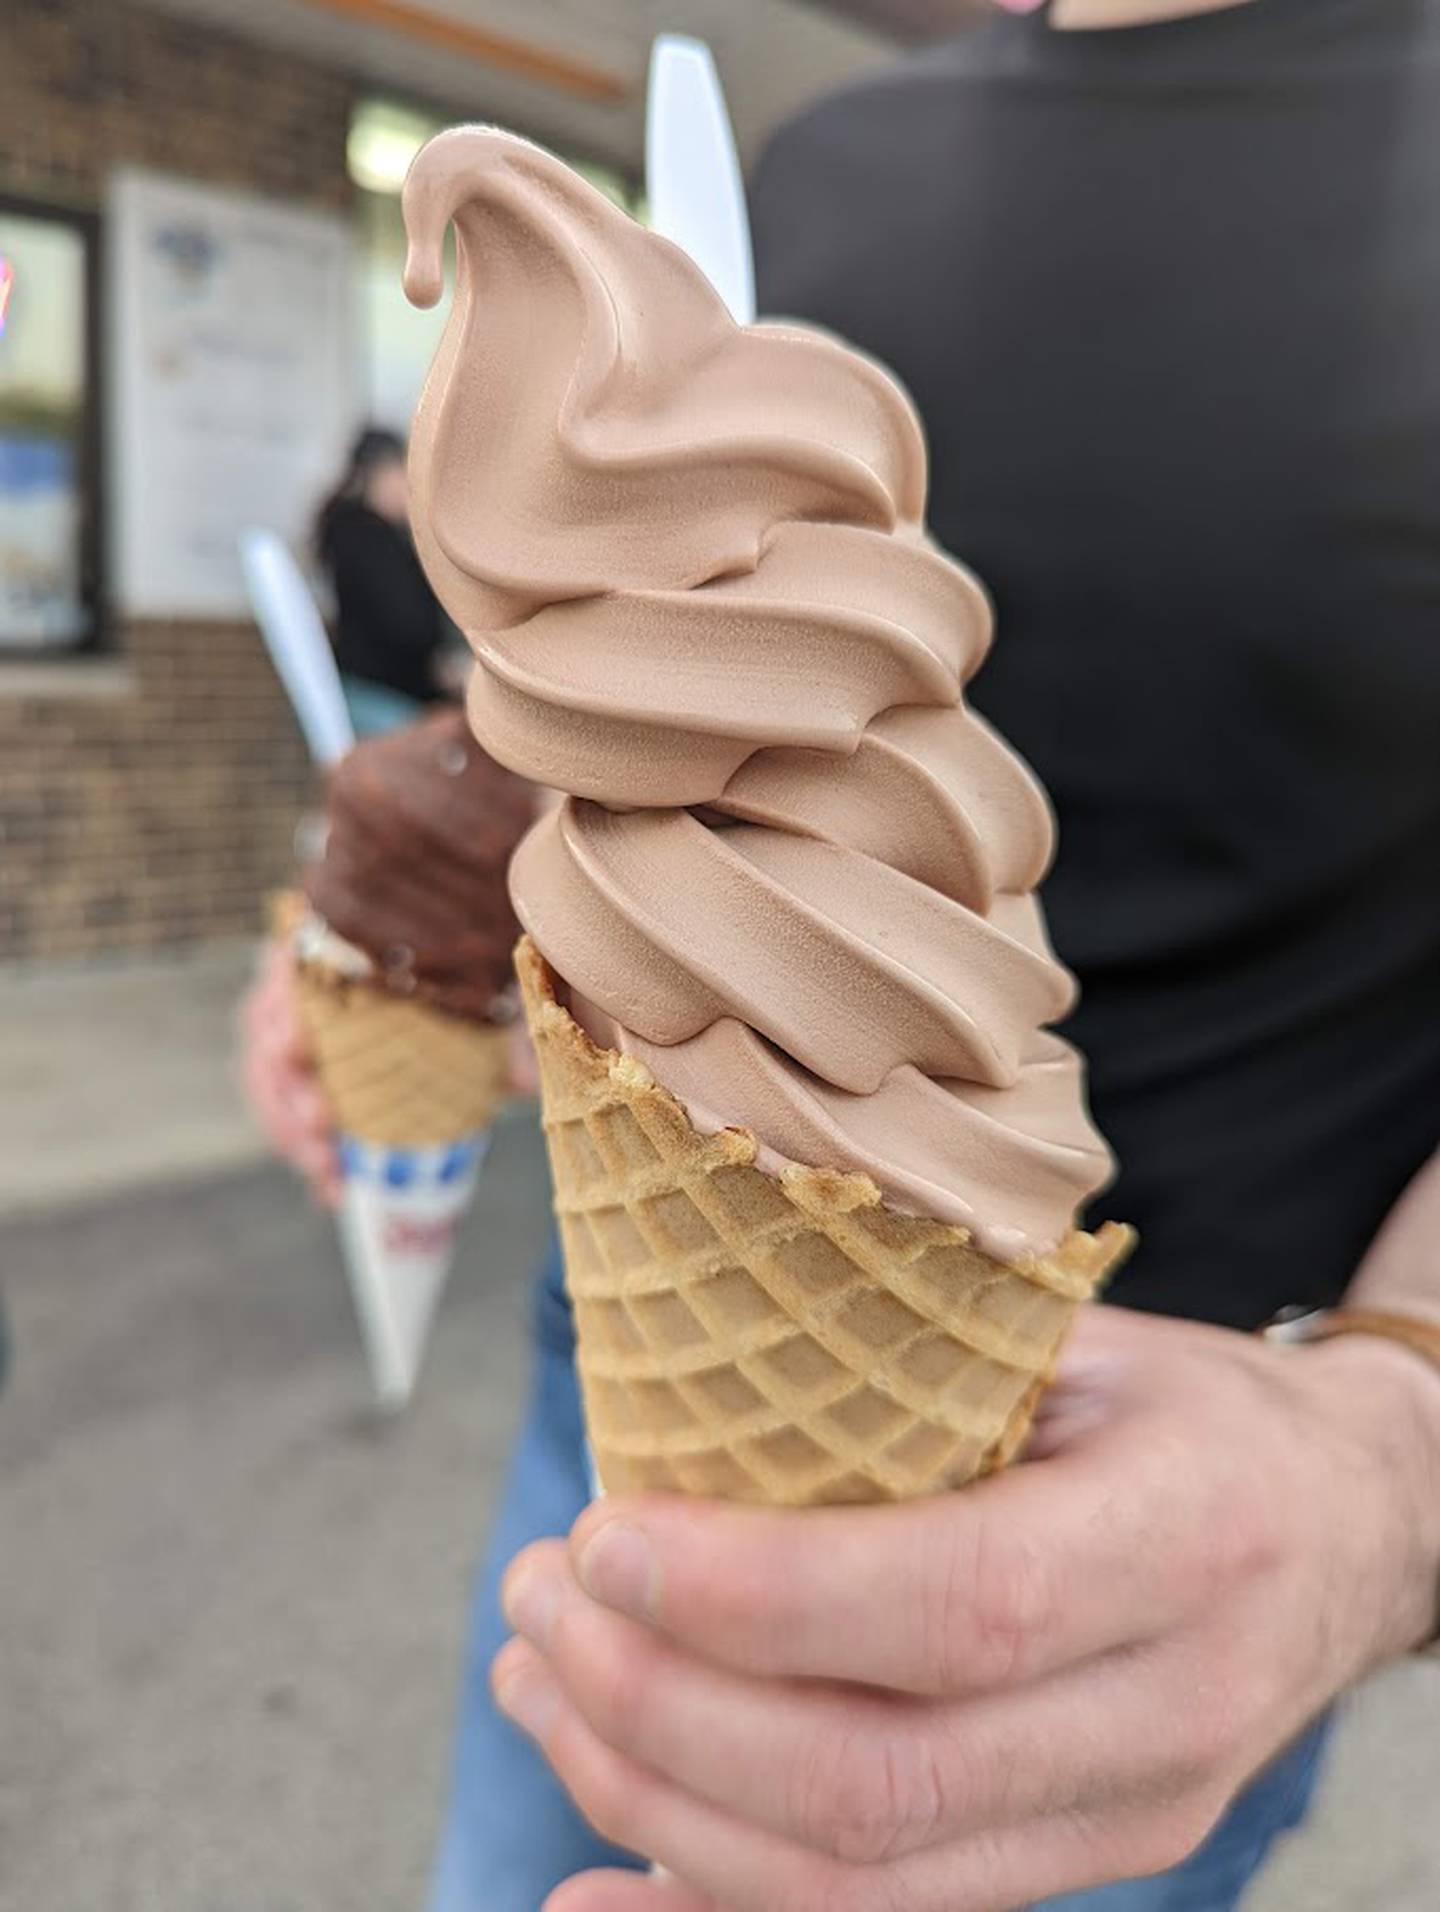 In the foreground is the chocolate swirl ice cream cone as served at Minooka Creamery. The vanilla swirl ice cream with a chocolate topping is in the background. Both were served on waffle cones.